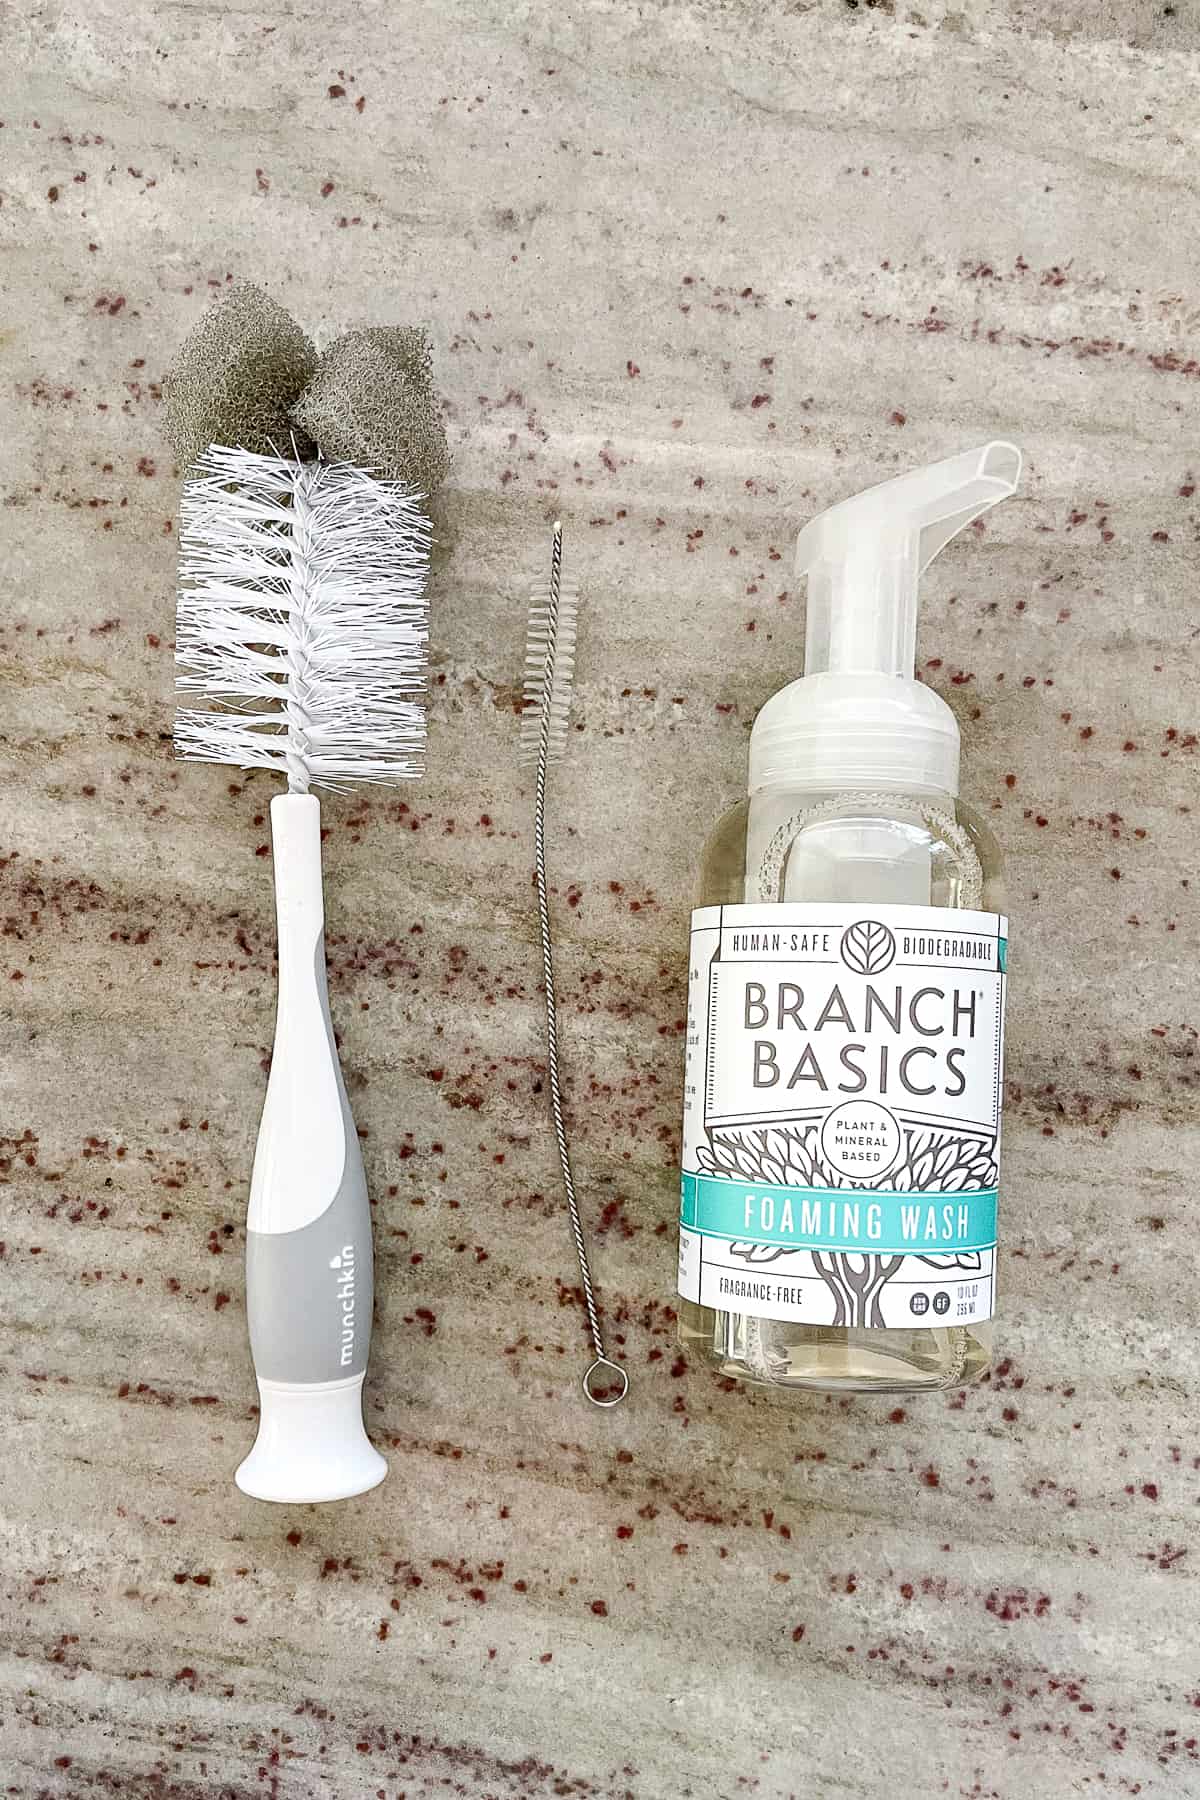 water bottle cleaning brushes and branch basics foaming wash